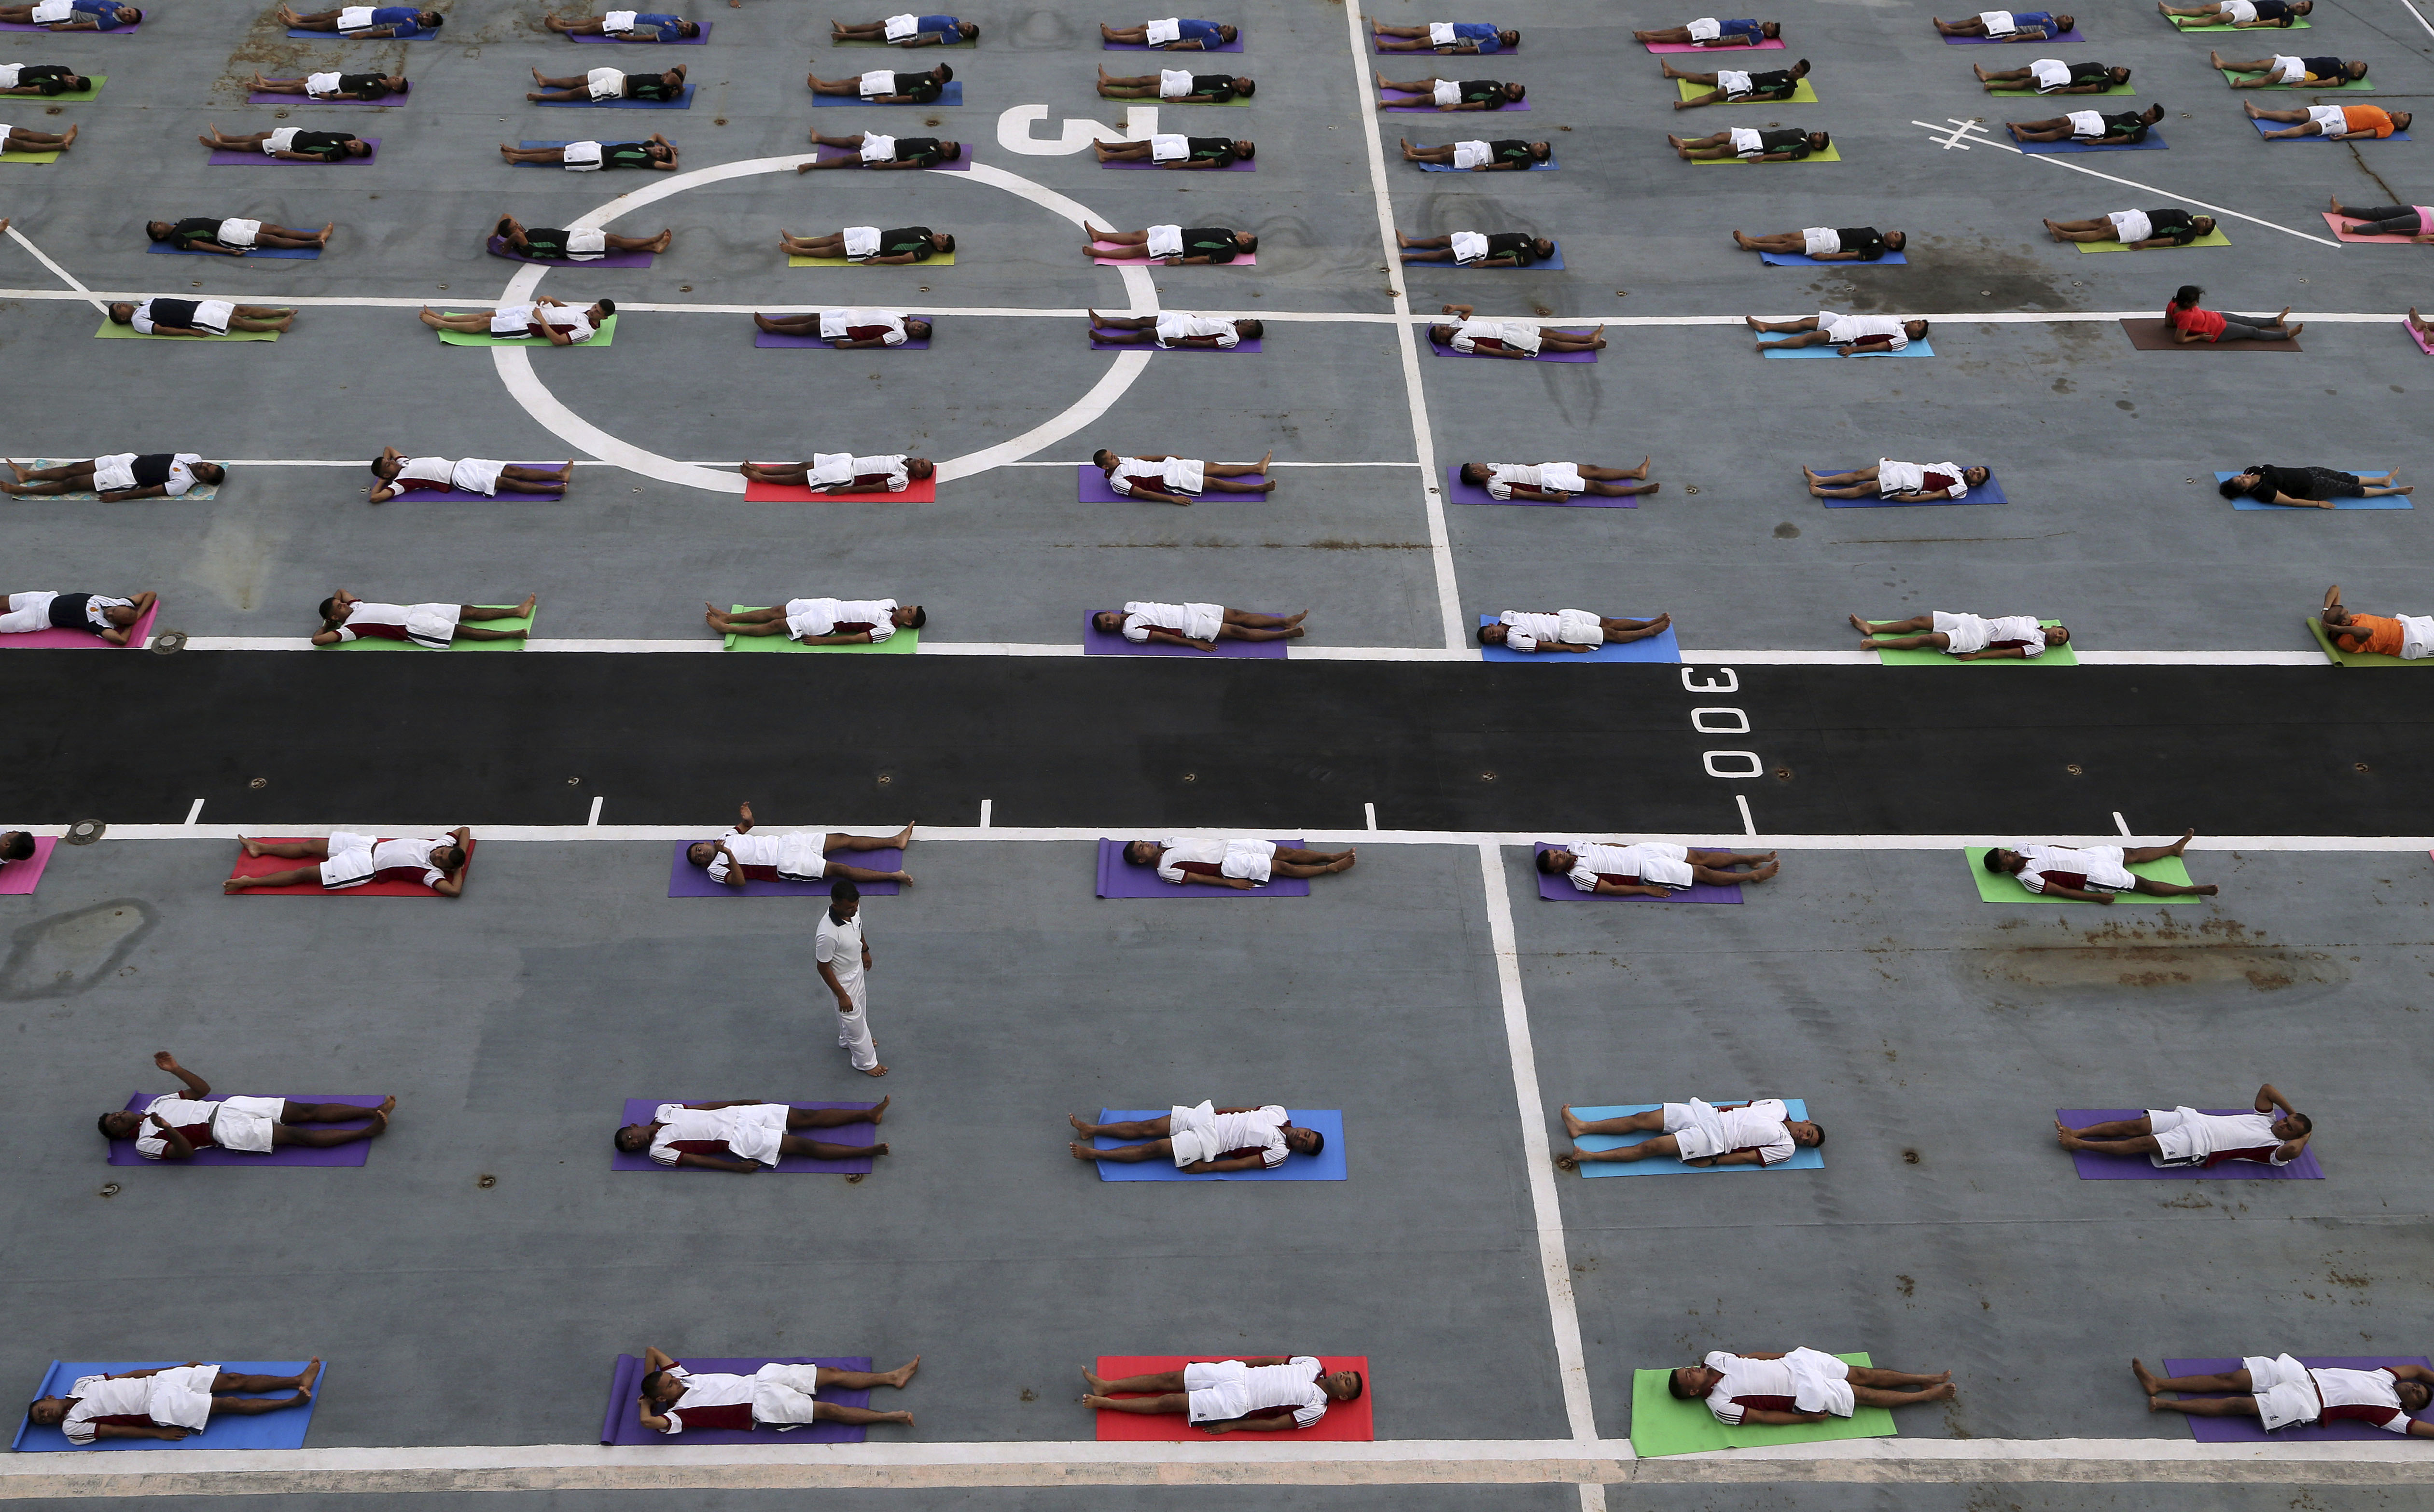 Indian armed forces and their families members perform Yoga on the deck of the Indian Naval aircraft carrier Viraat to mark International Yoga Day in Mumbai, India, Wednesday, June 21, 2017. Yoga practitioners took a relaxing break to bend, twist and pose Wednesday morning for the annual event celebrating the practice, especially in the country where it began. (AP Photo/Rajanish Kakade)